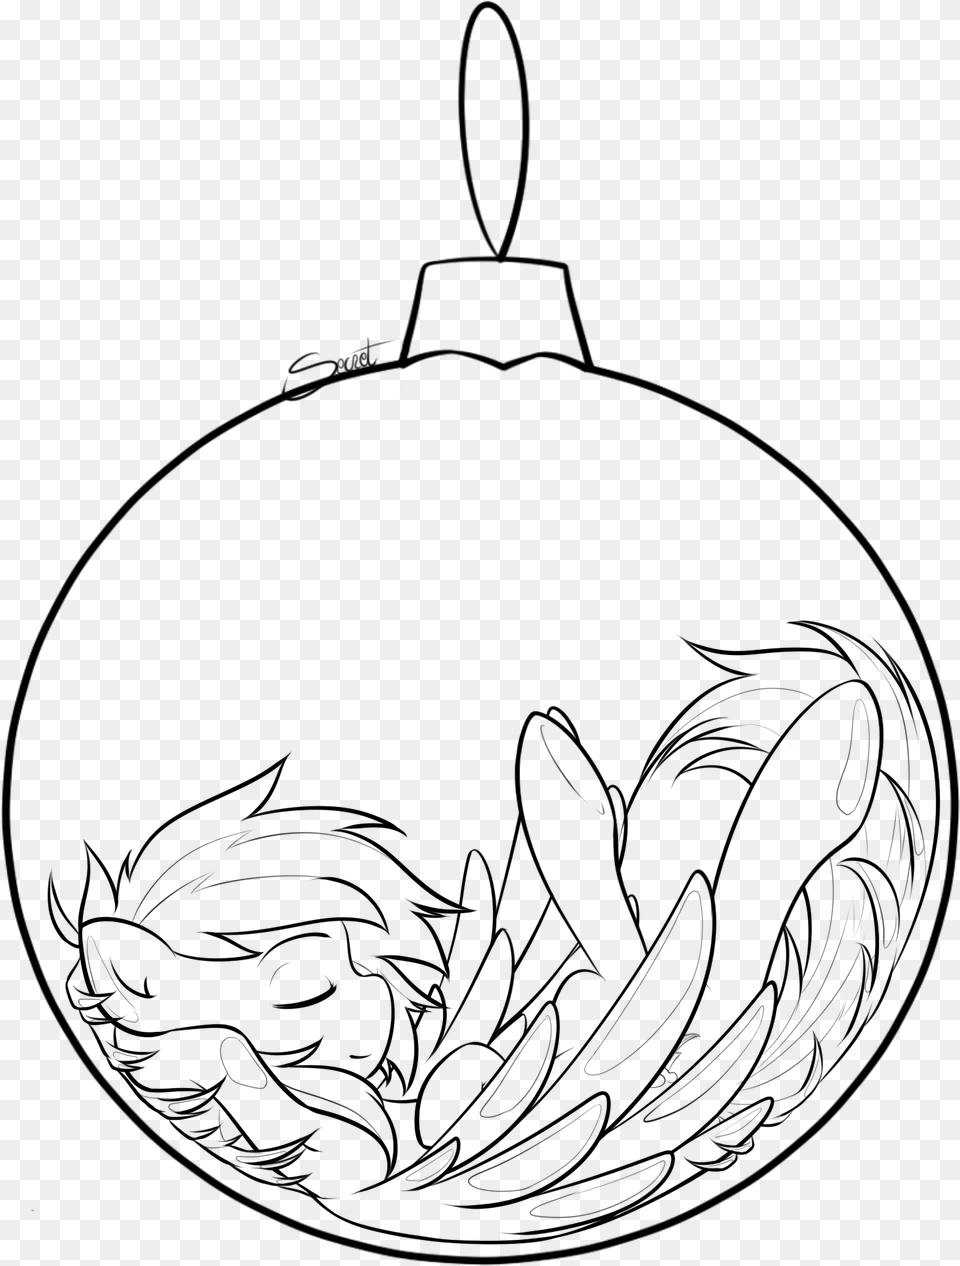 Rainbow Dash Bauble By Secret Pony On Clipart Library Mlp Rainbow Dash Lineart, Gray Png